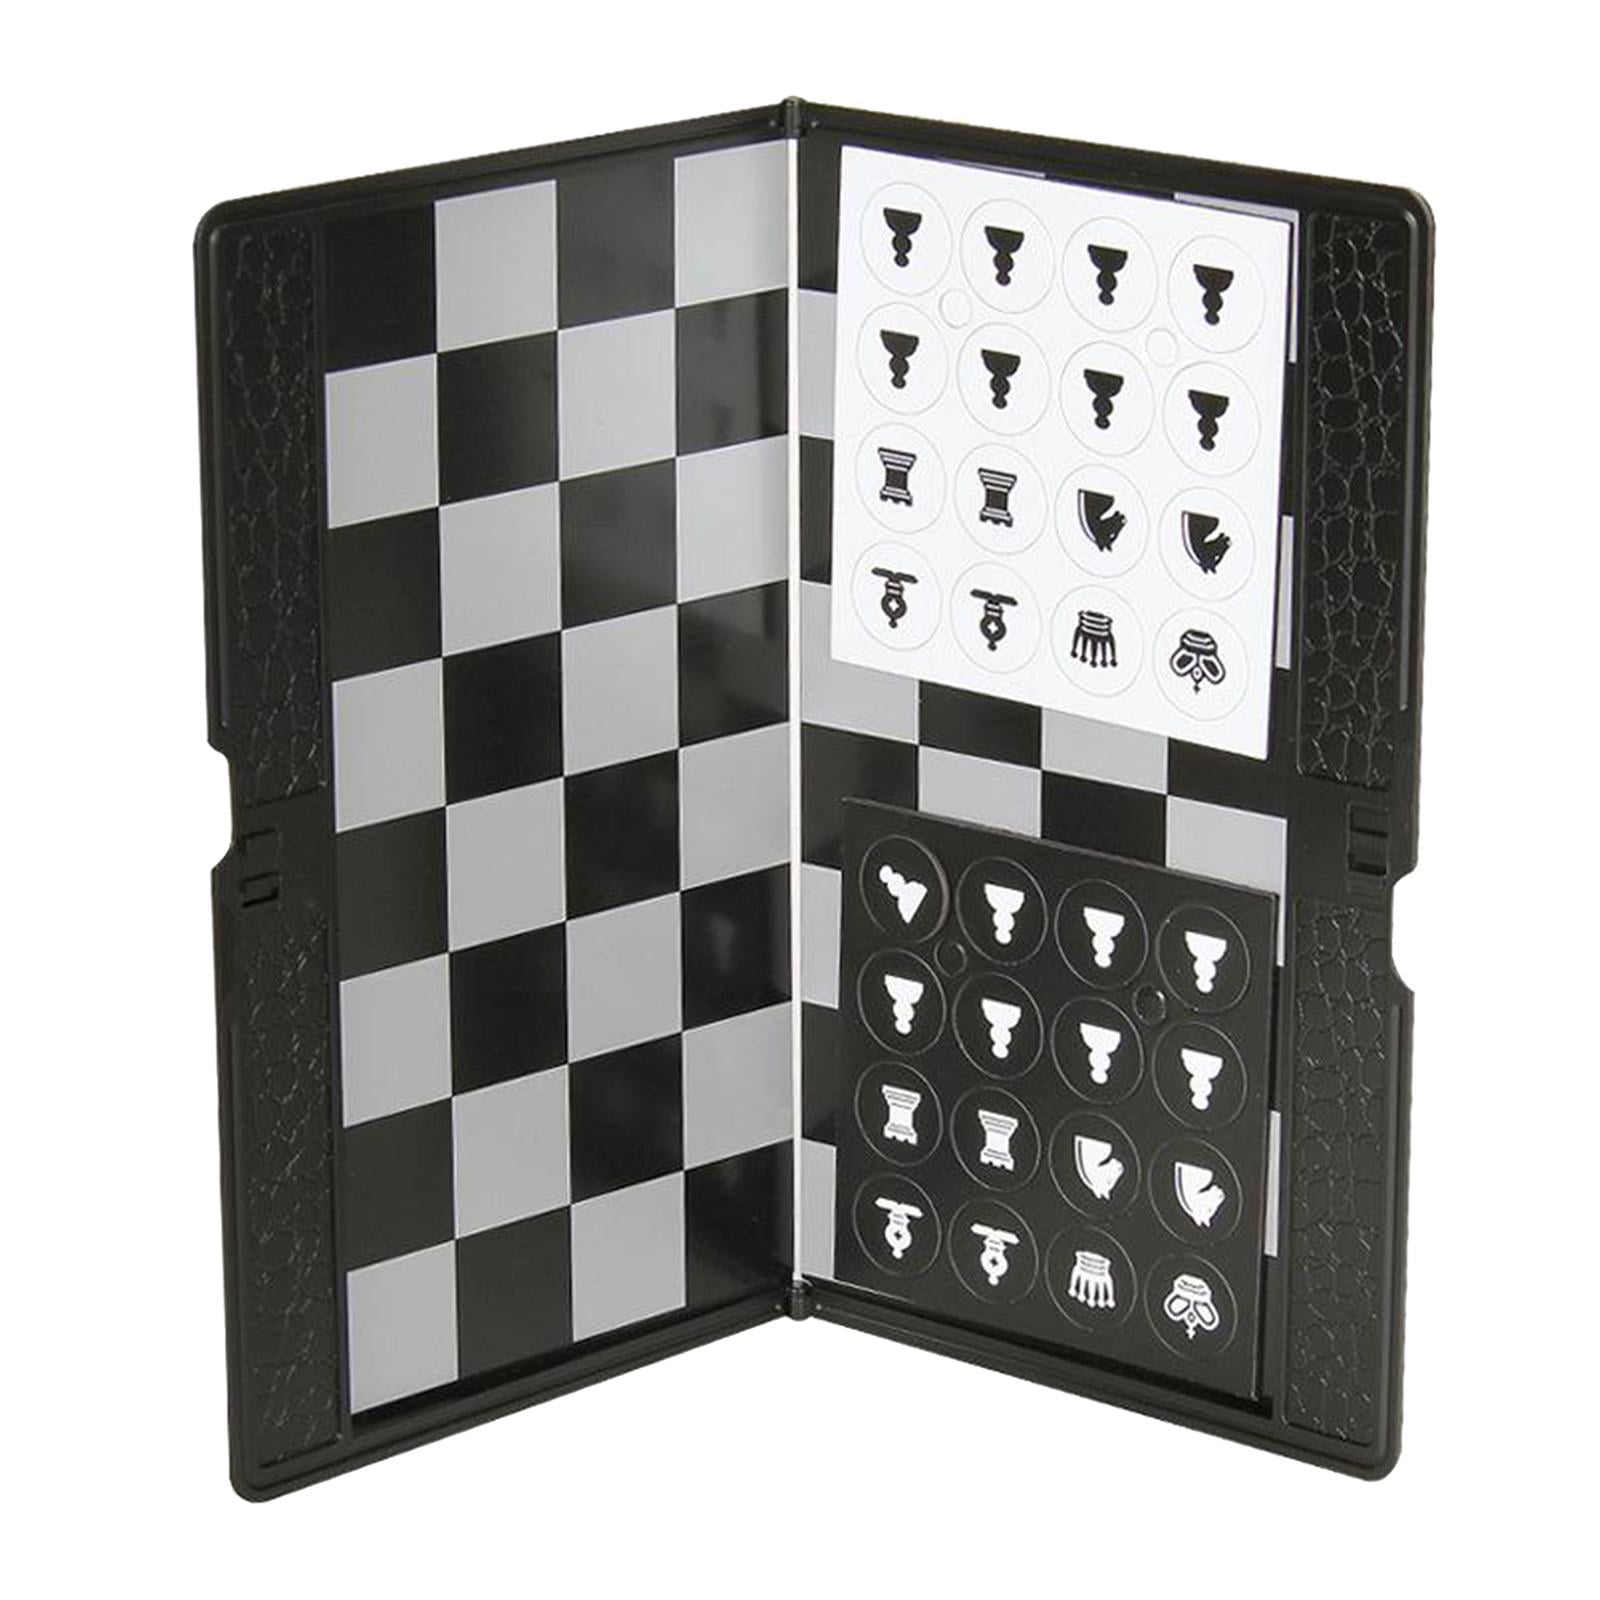 Foldable MINI Magnetic Chess Set Portable Wallet Pocket Chess Board Games 